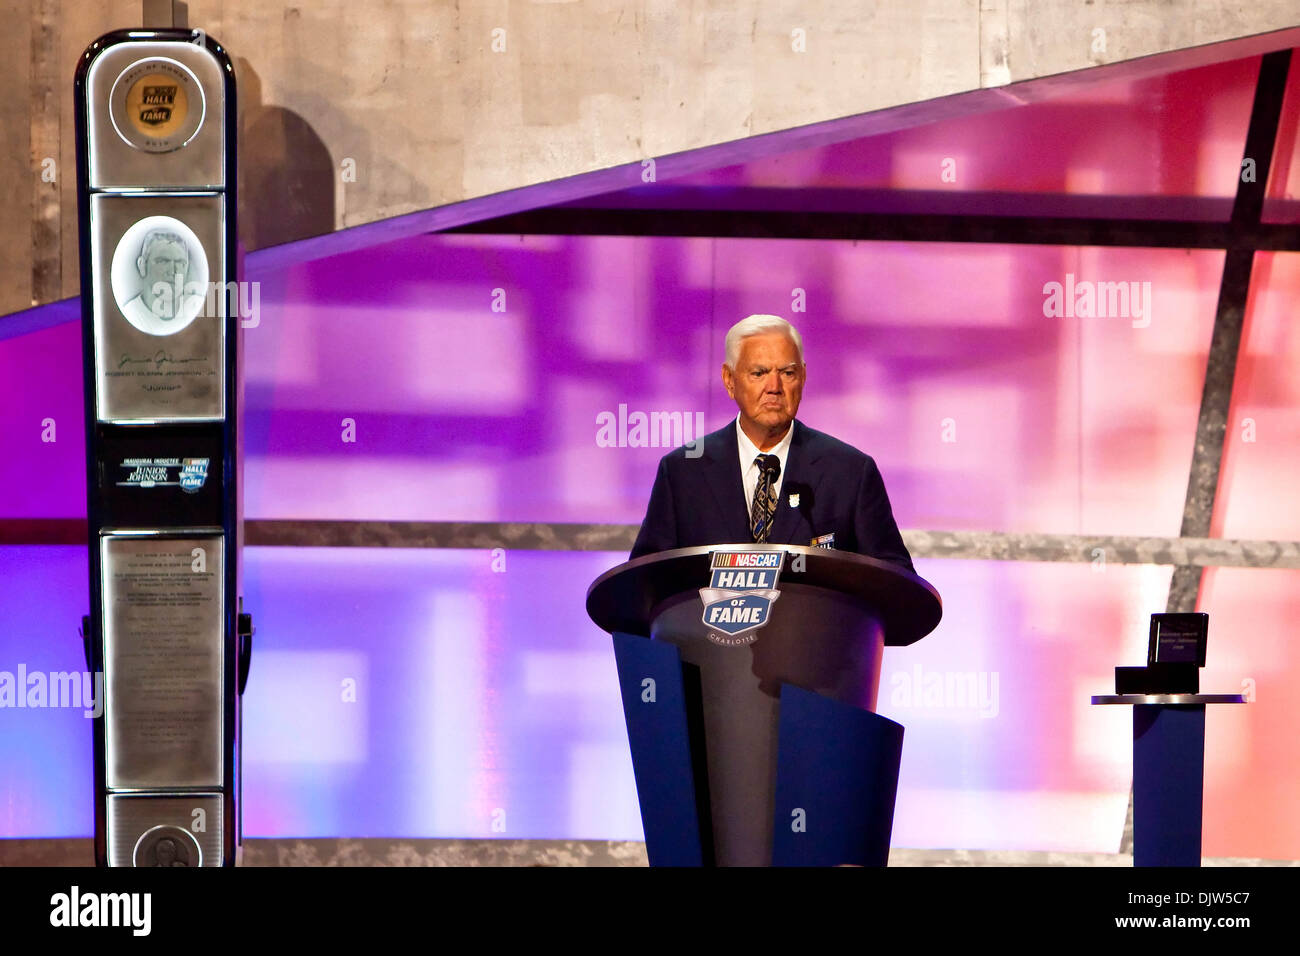 Junior Johnson gives his acceptance speech during the Inaugural NASCAR Hall Of Fame Induction Ceremony at the new Hall Of Fame building in Charlotte, North Carolina. (Credit Image: © Leon Switzer/Southcreek Global/ZUMApress.com) Stock Photo